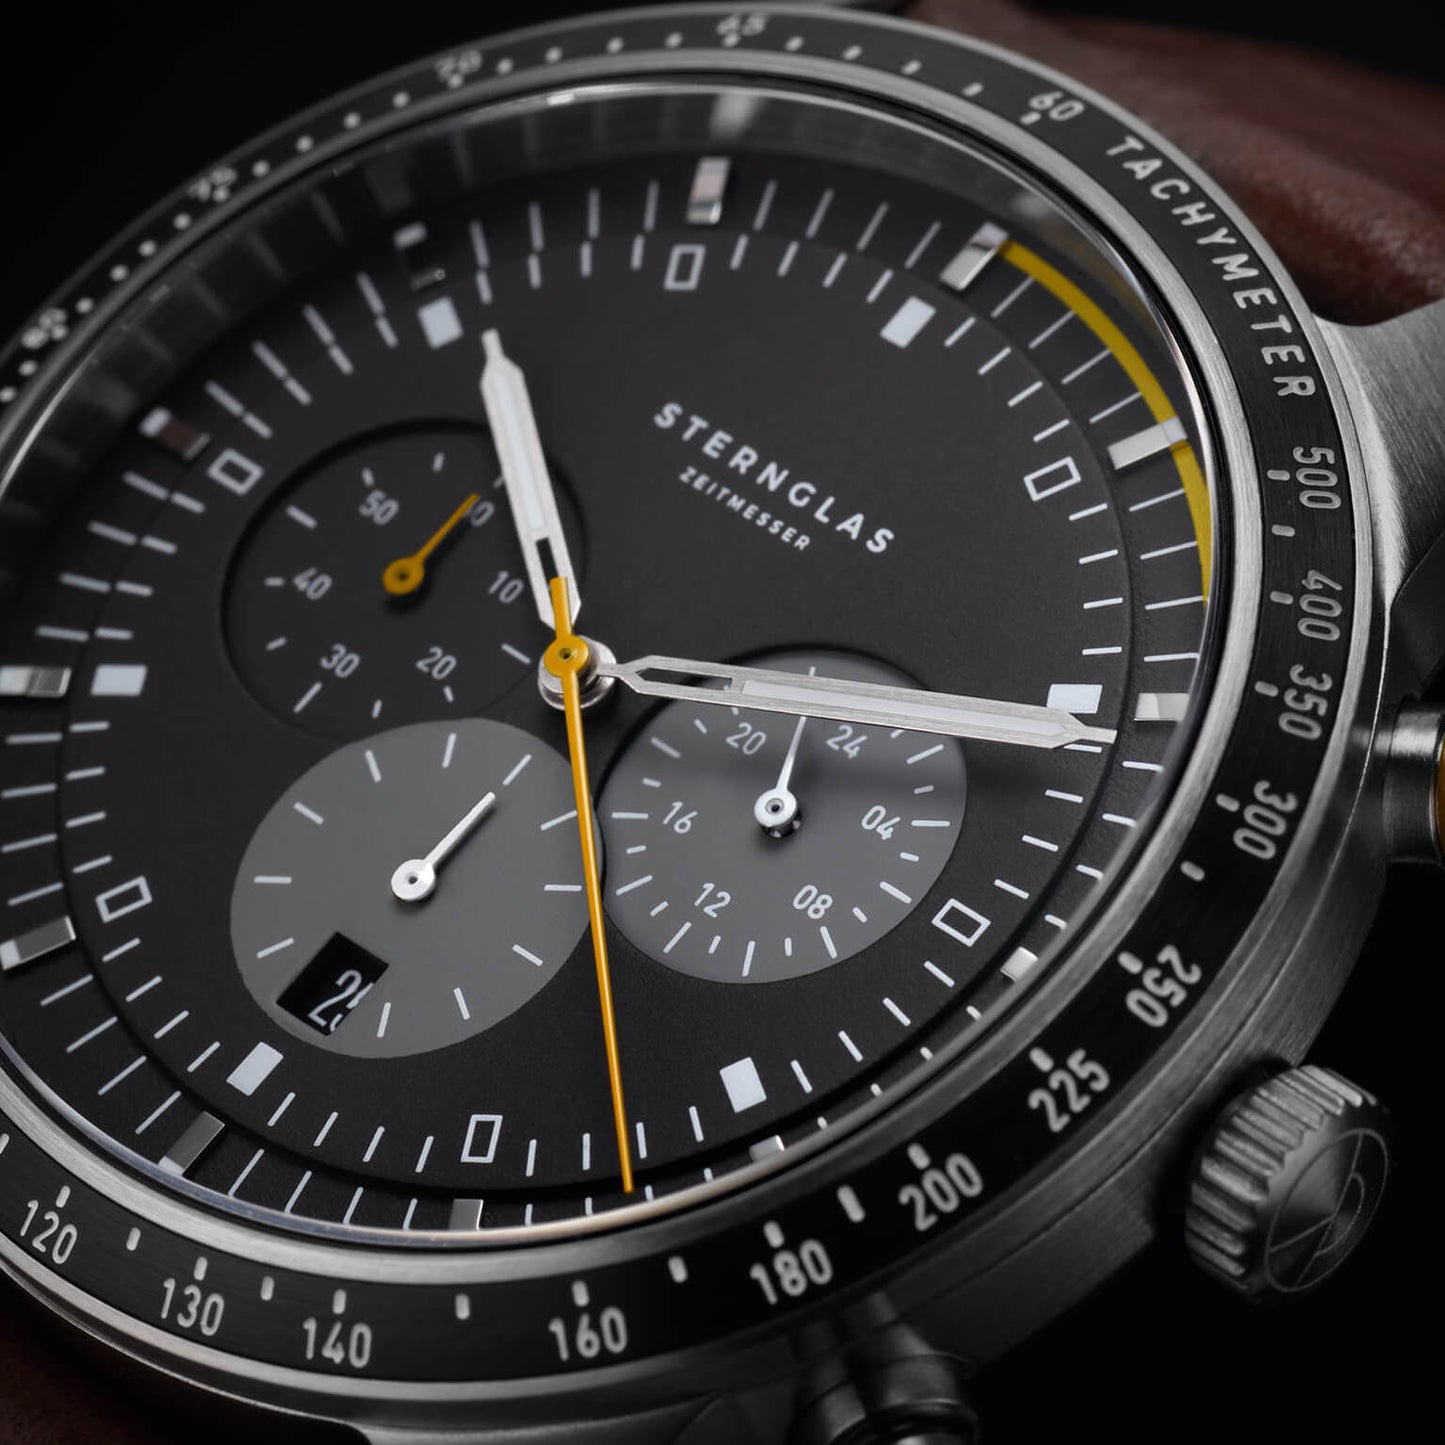 popup|Tachymeter scale|The bezel with tachymeter scale allows for the calculation of speeds.